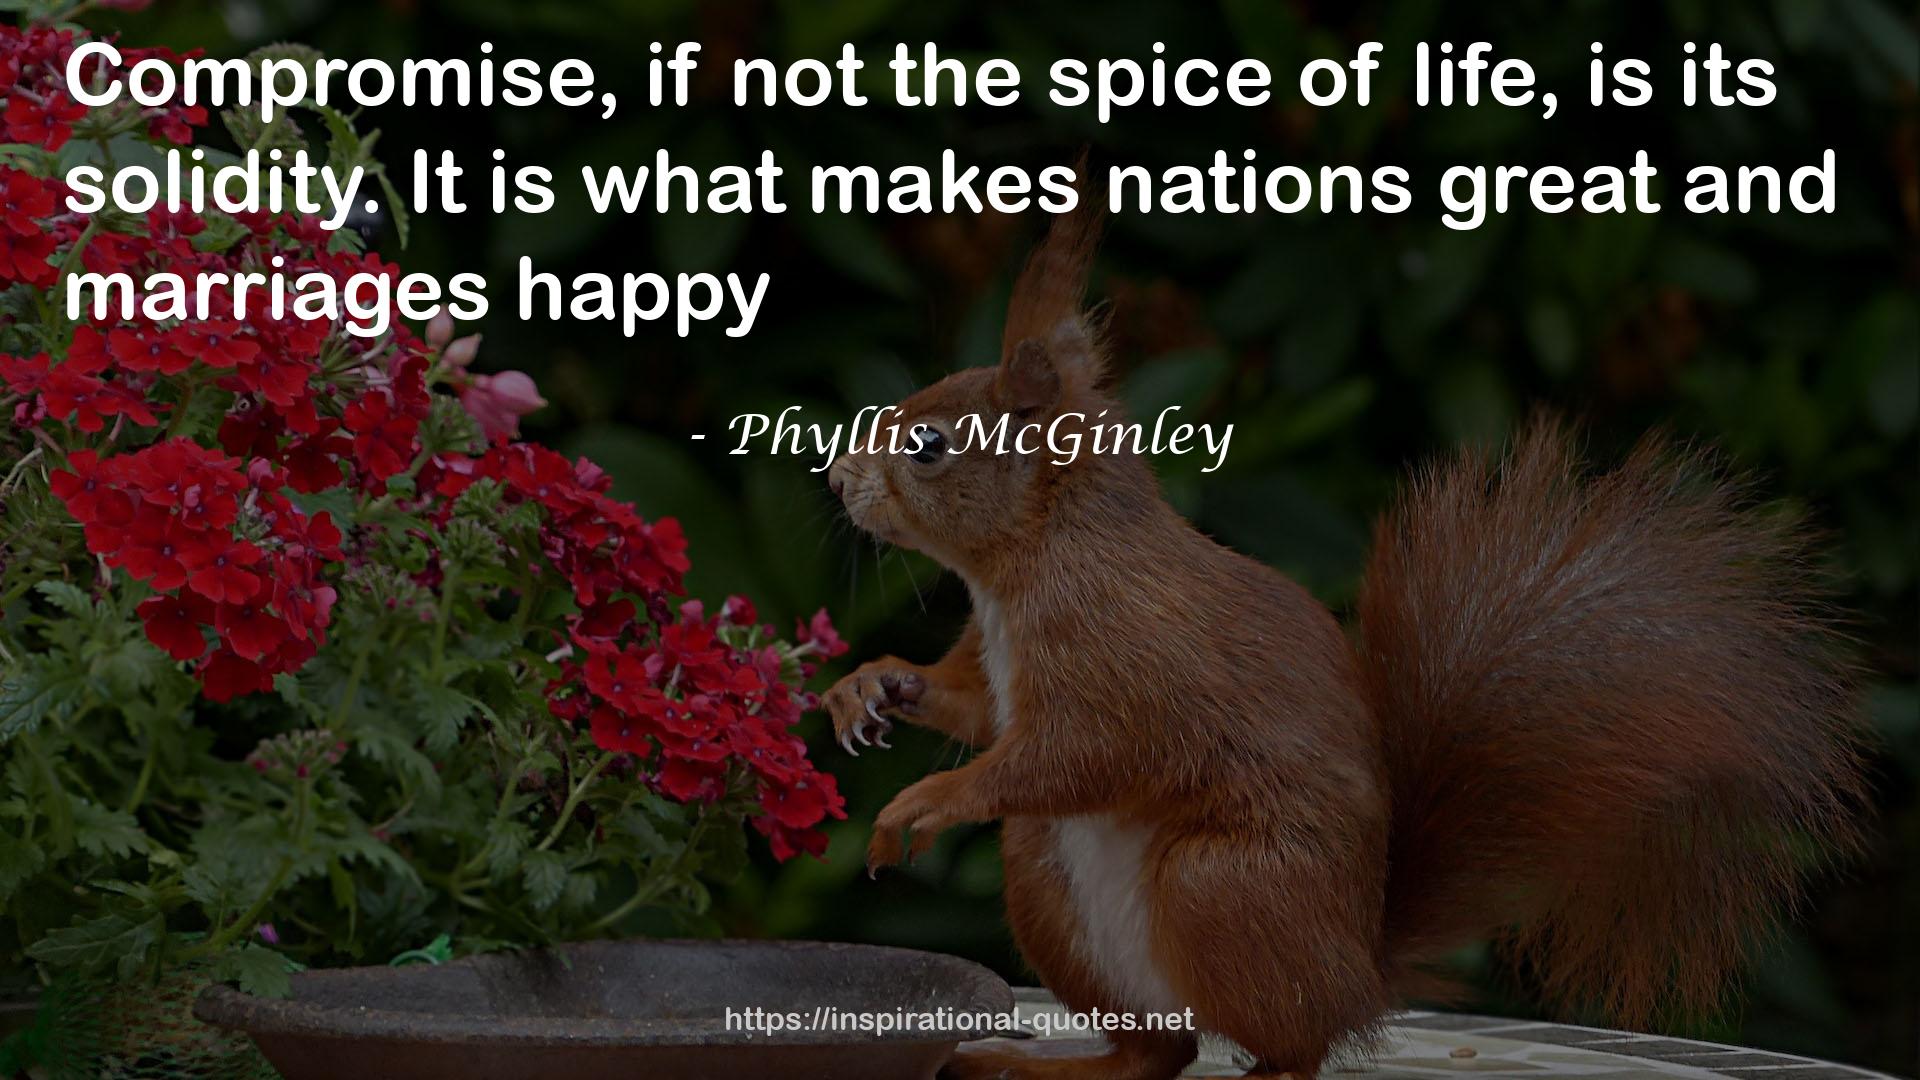 Phyllis McGinley QUOTES